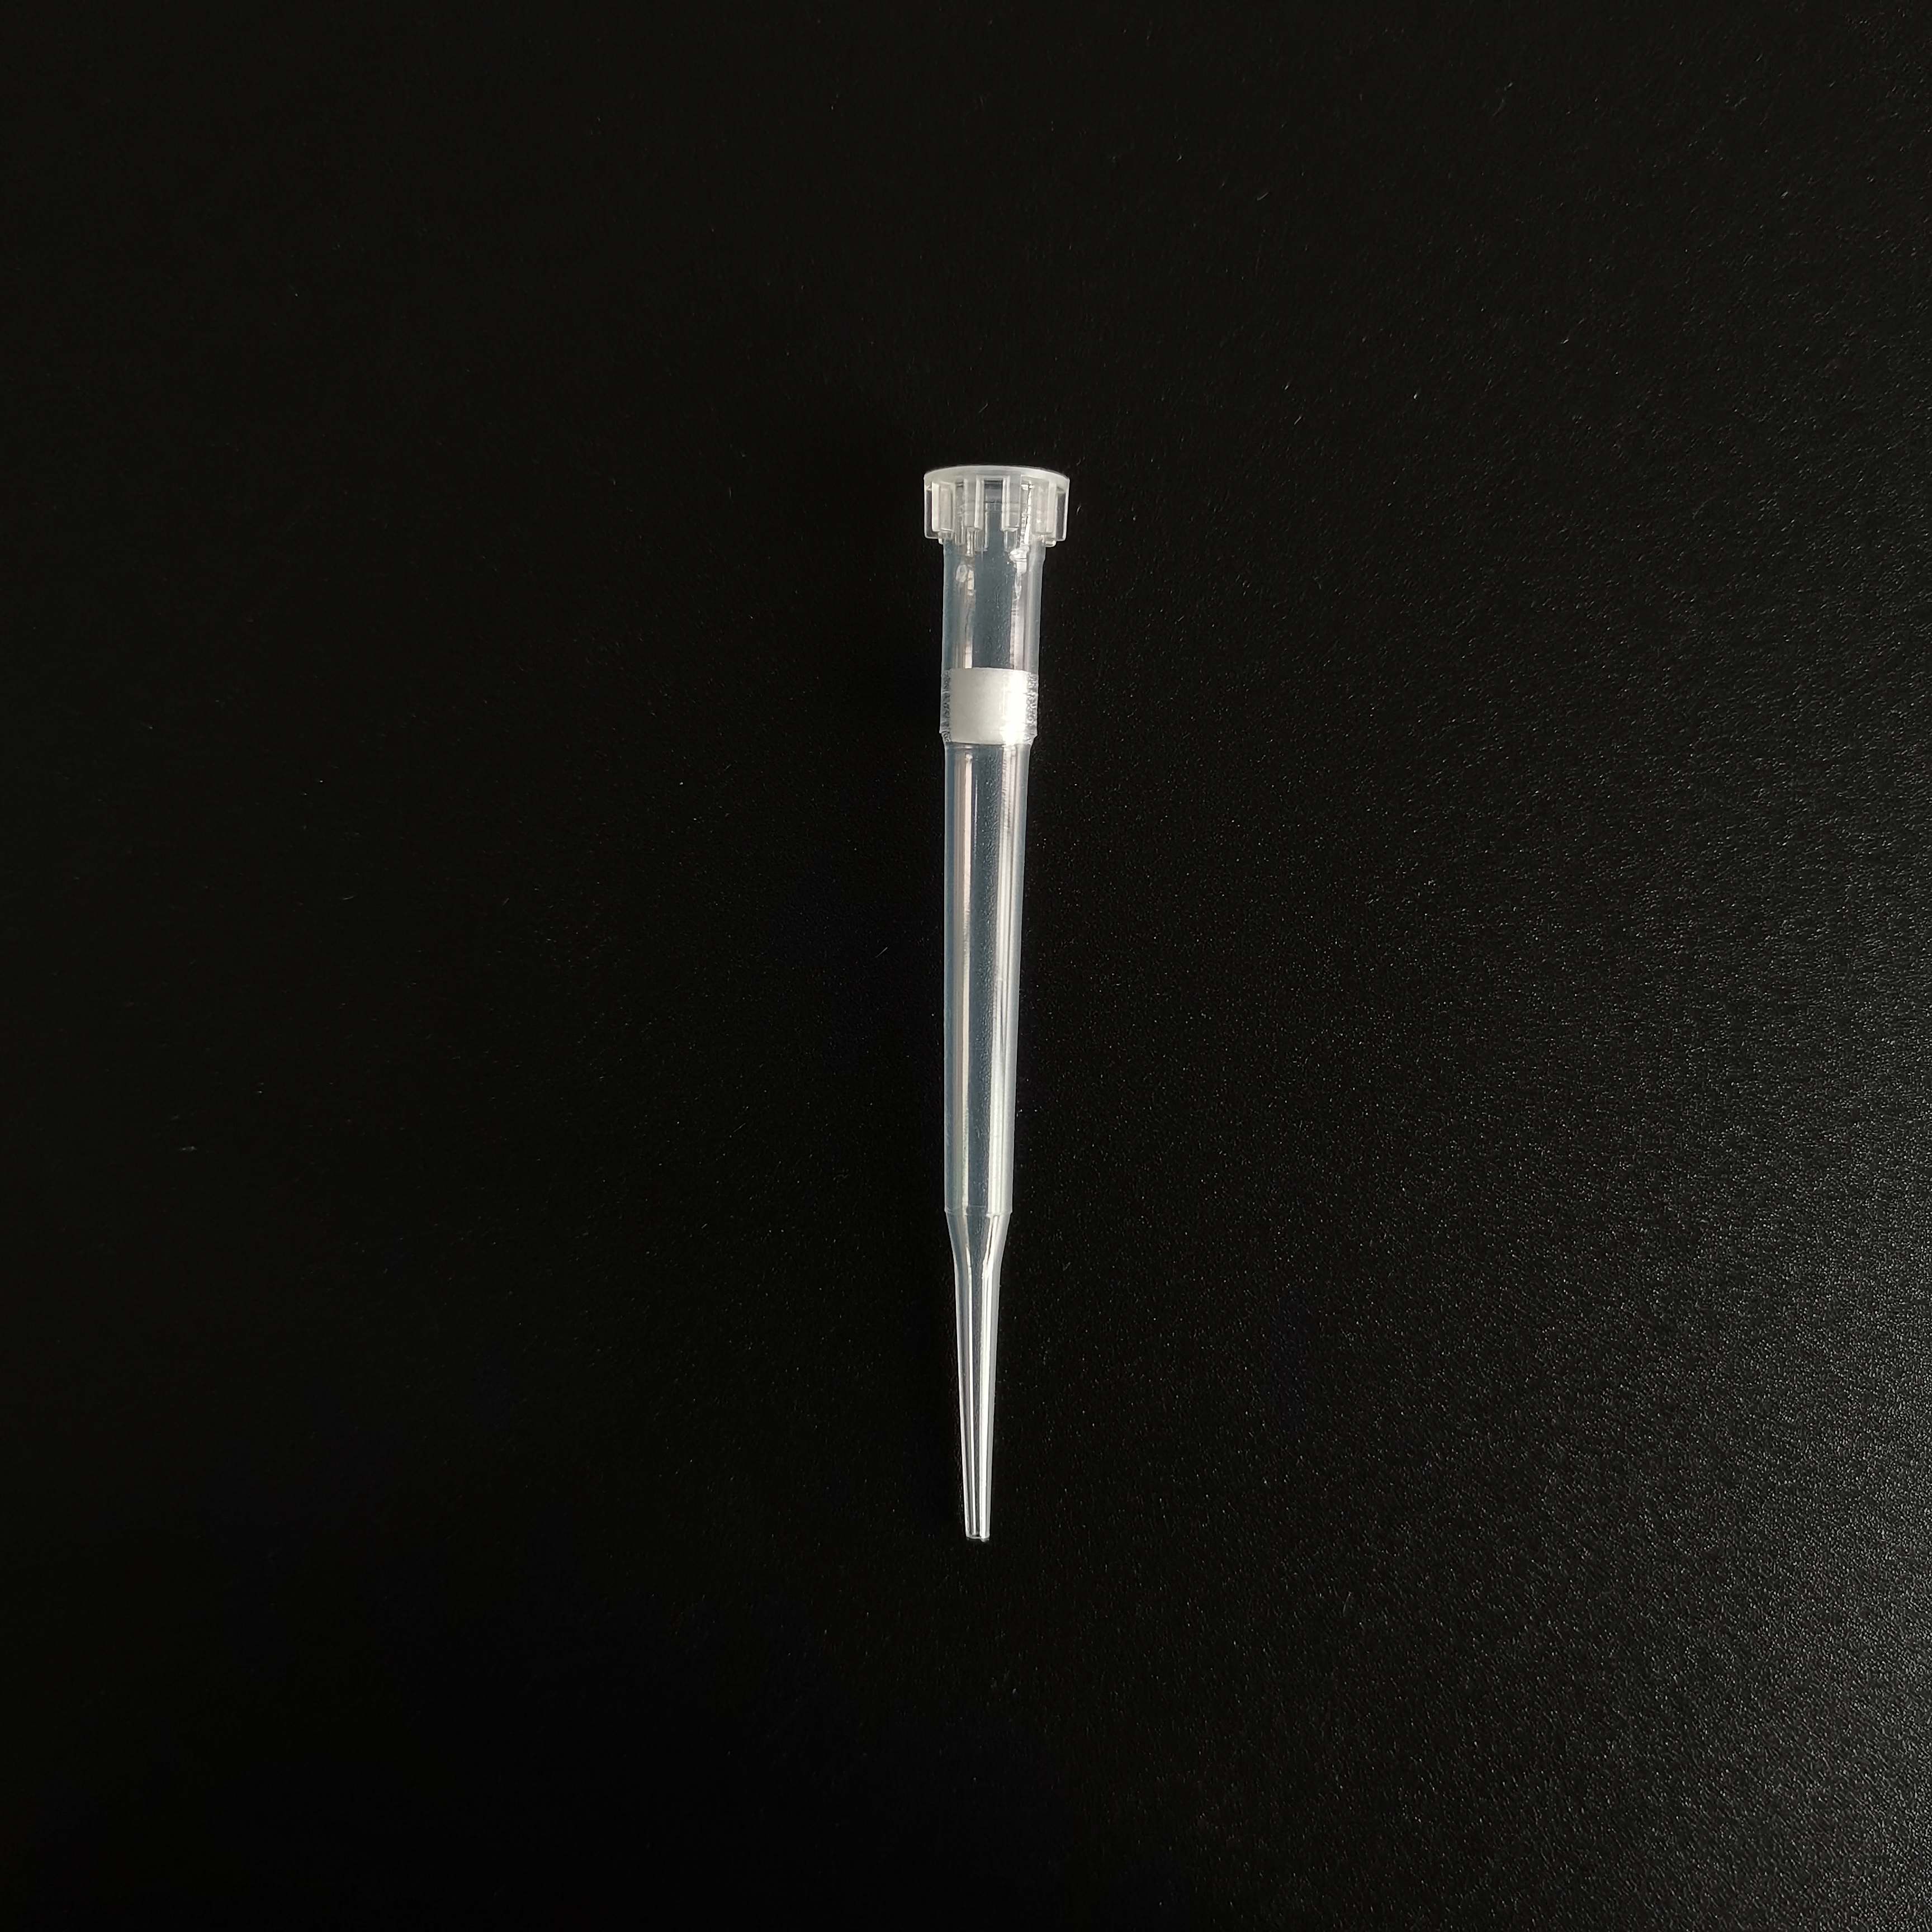 Robotic Low Retention Pipette Filter Tips 250μL for Laboratory Test (Dnase & Rnase Free, Sterilized) 